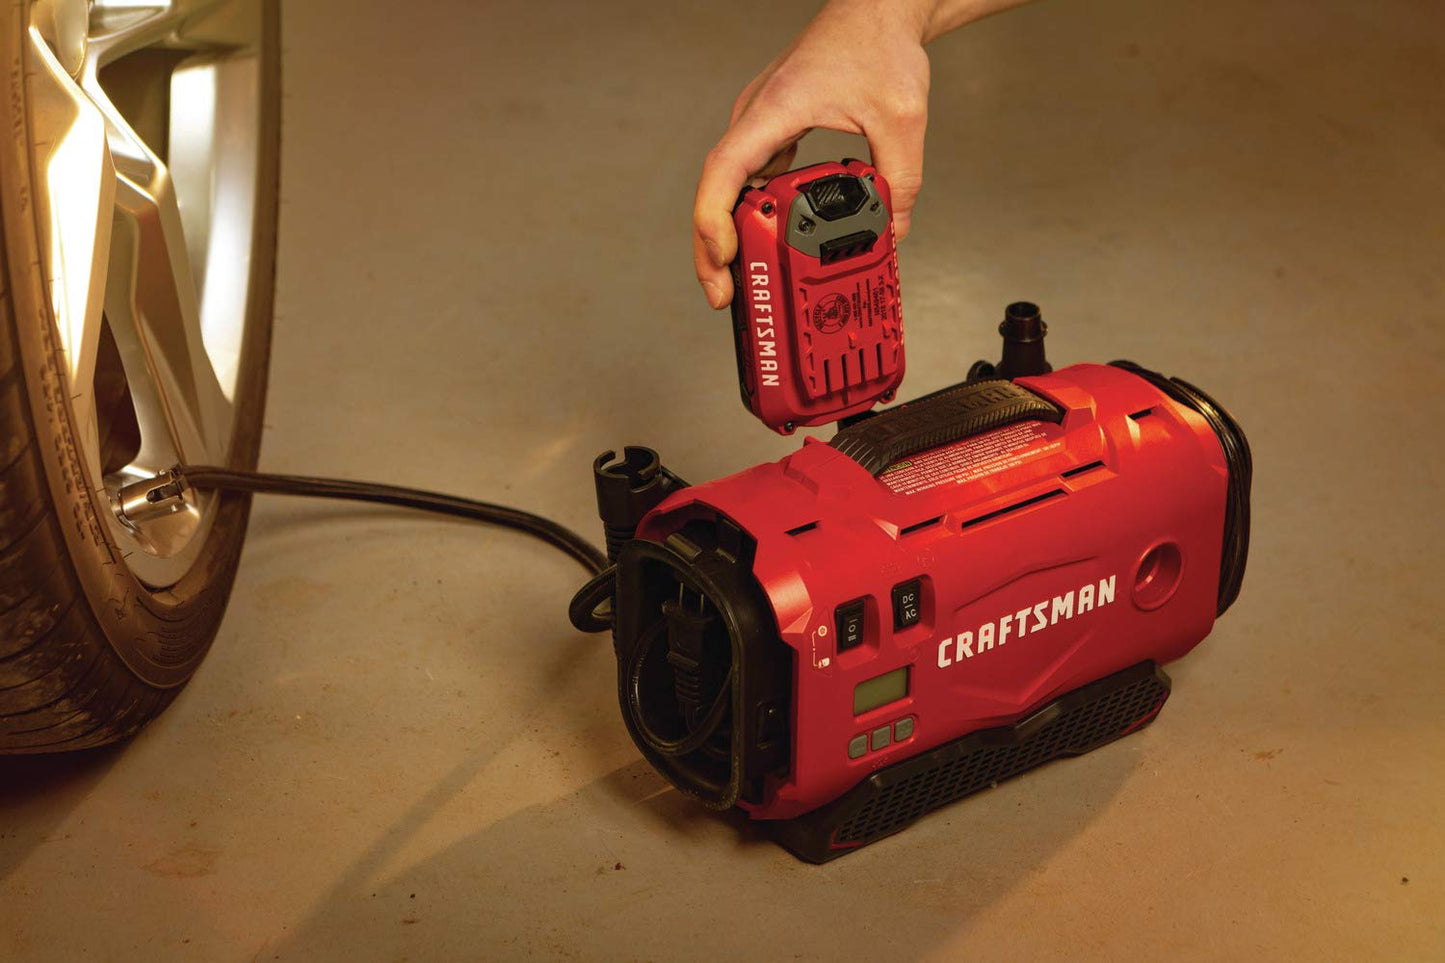 CRAFTSMAN V20 Tire Inflator, Compact and Portable, Automatic Shut Off, Digital PSI Gauge, Bare Tool Only (CMCE520B)